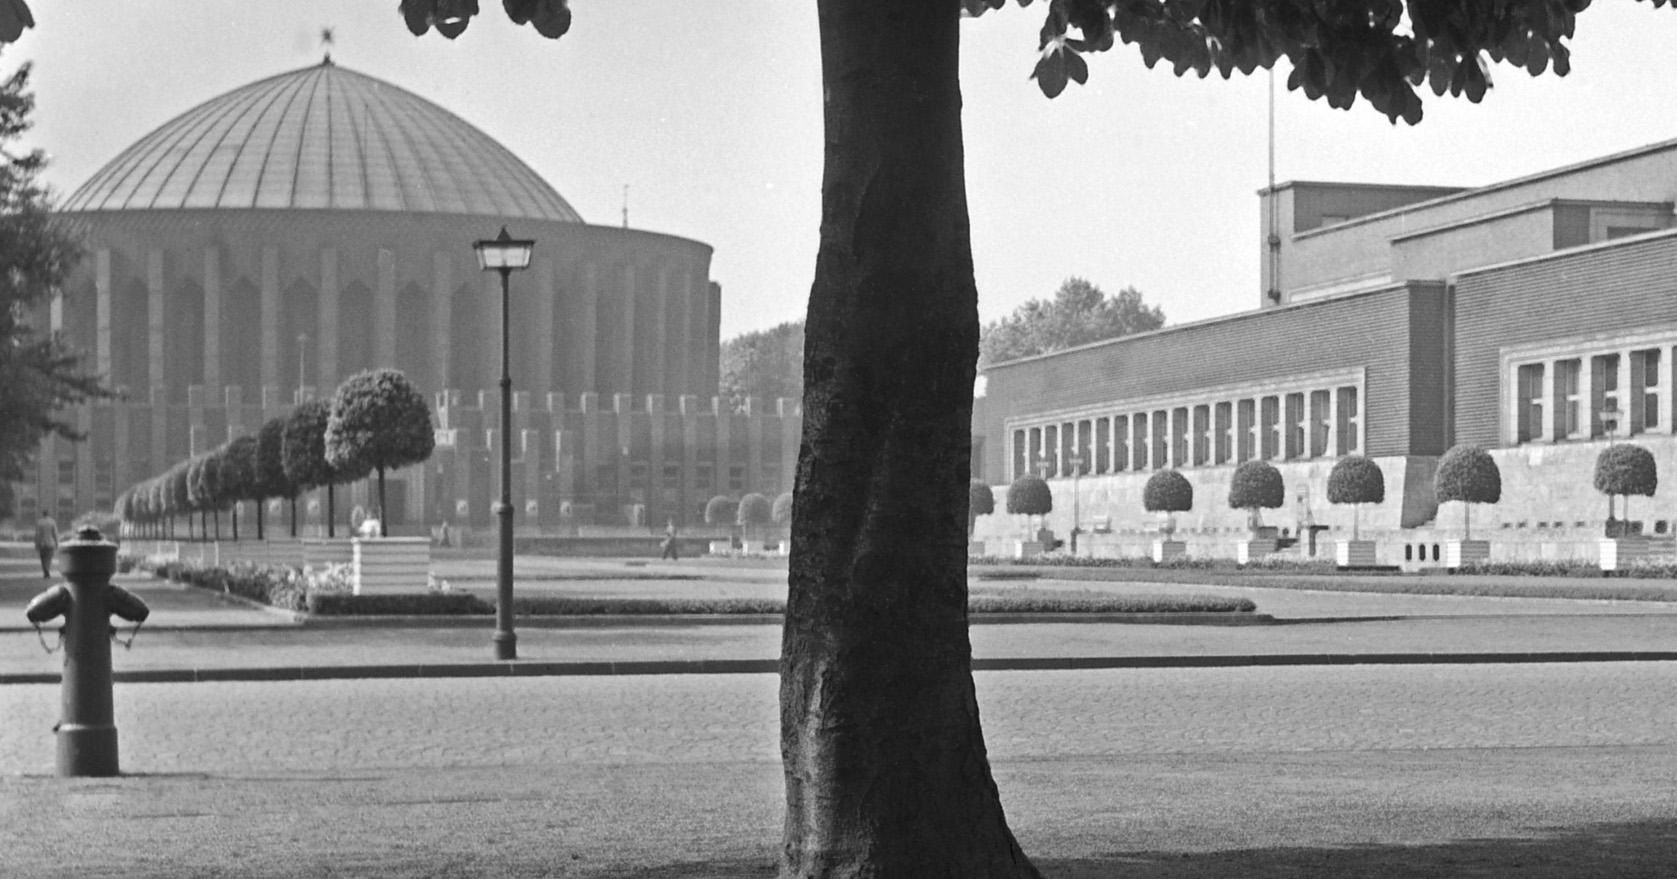 Duesseldorf planetarium and Shipping Museum, Germany 1937 Printed Later  - Photograph by Karl Heinrich Lämmel